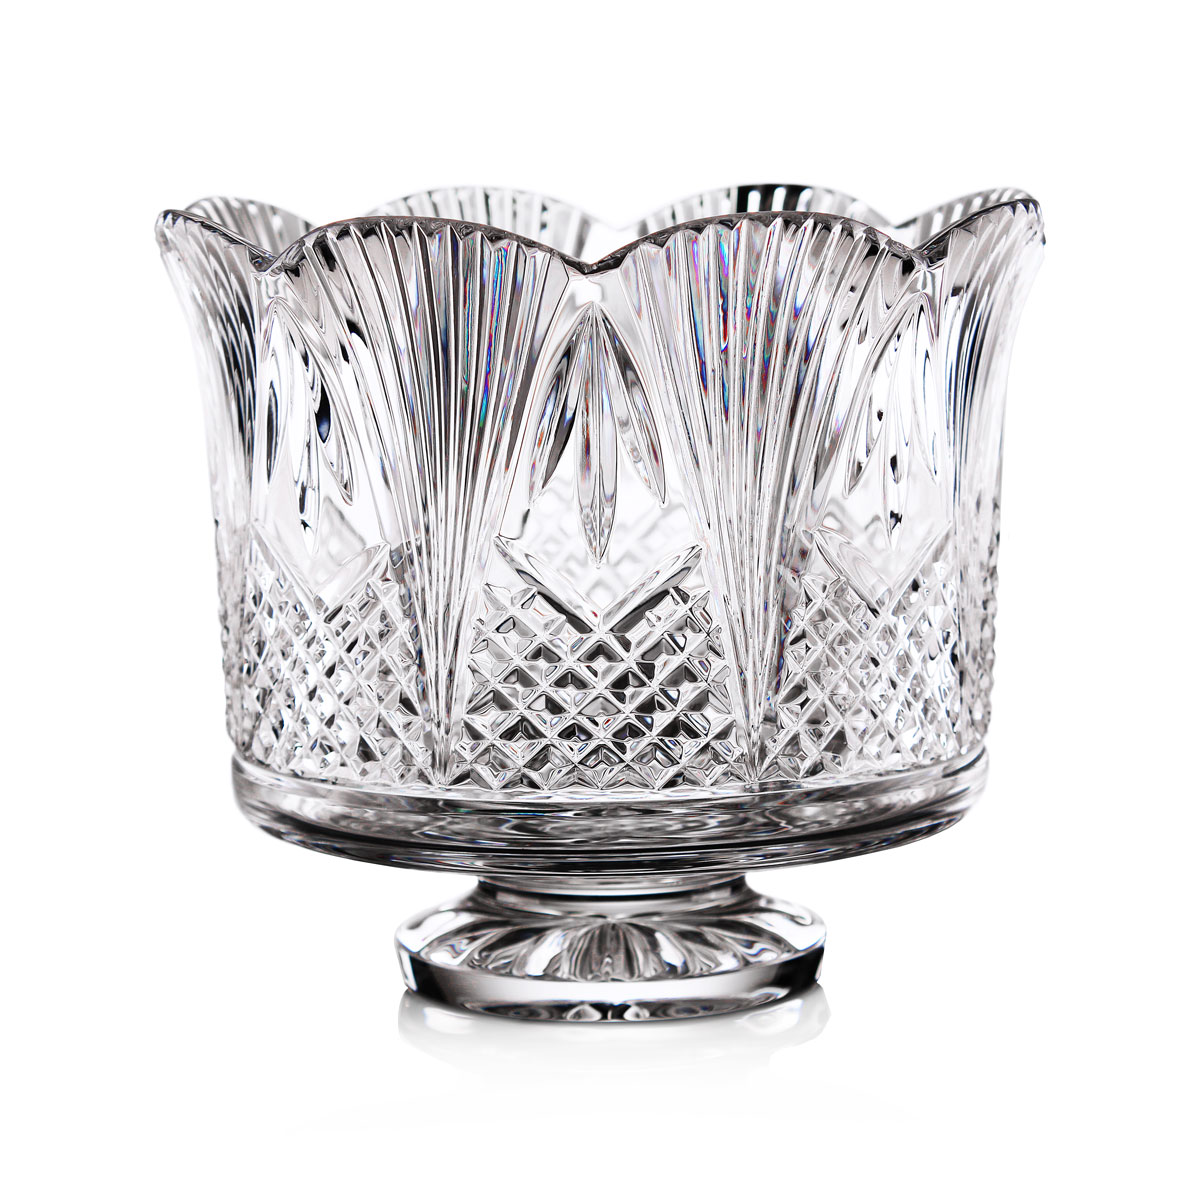 Waterford Crystal 11" House of Waterford Comeragh Footed Bowl